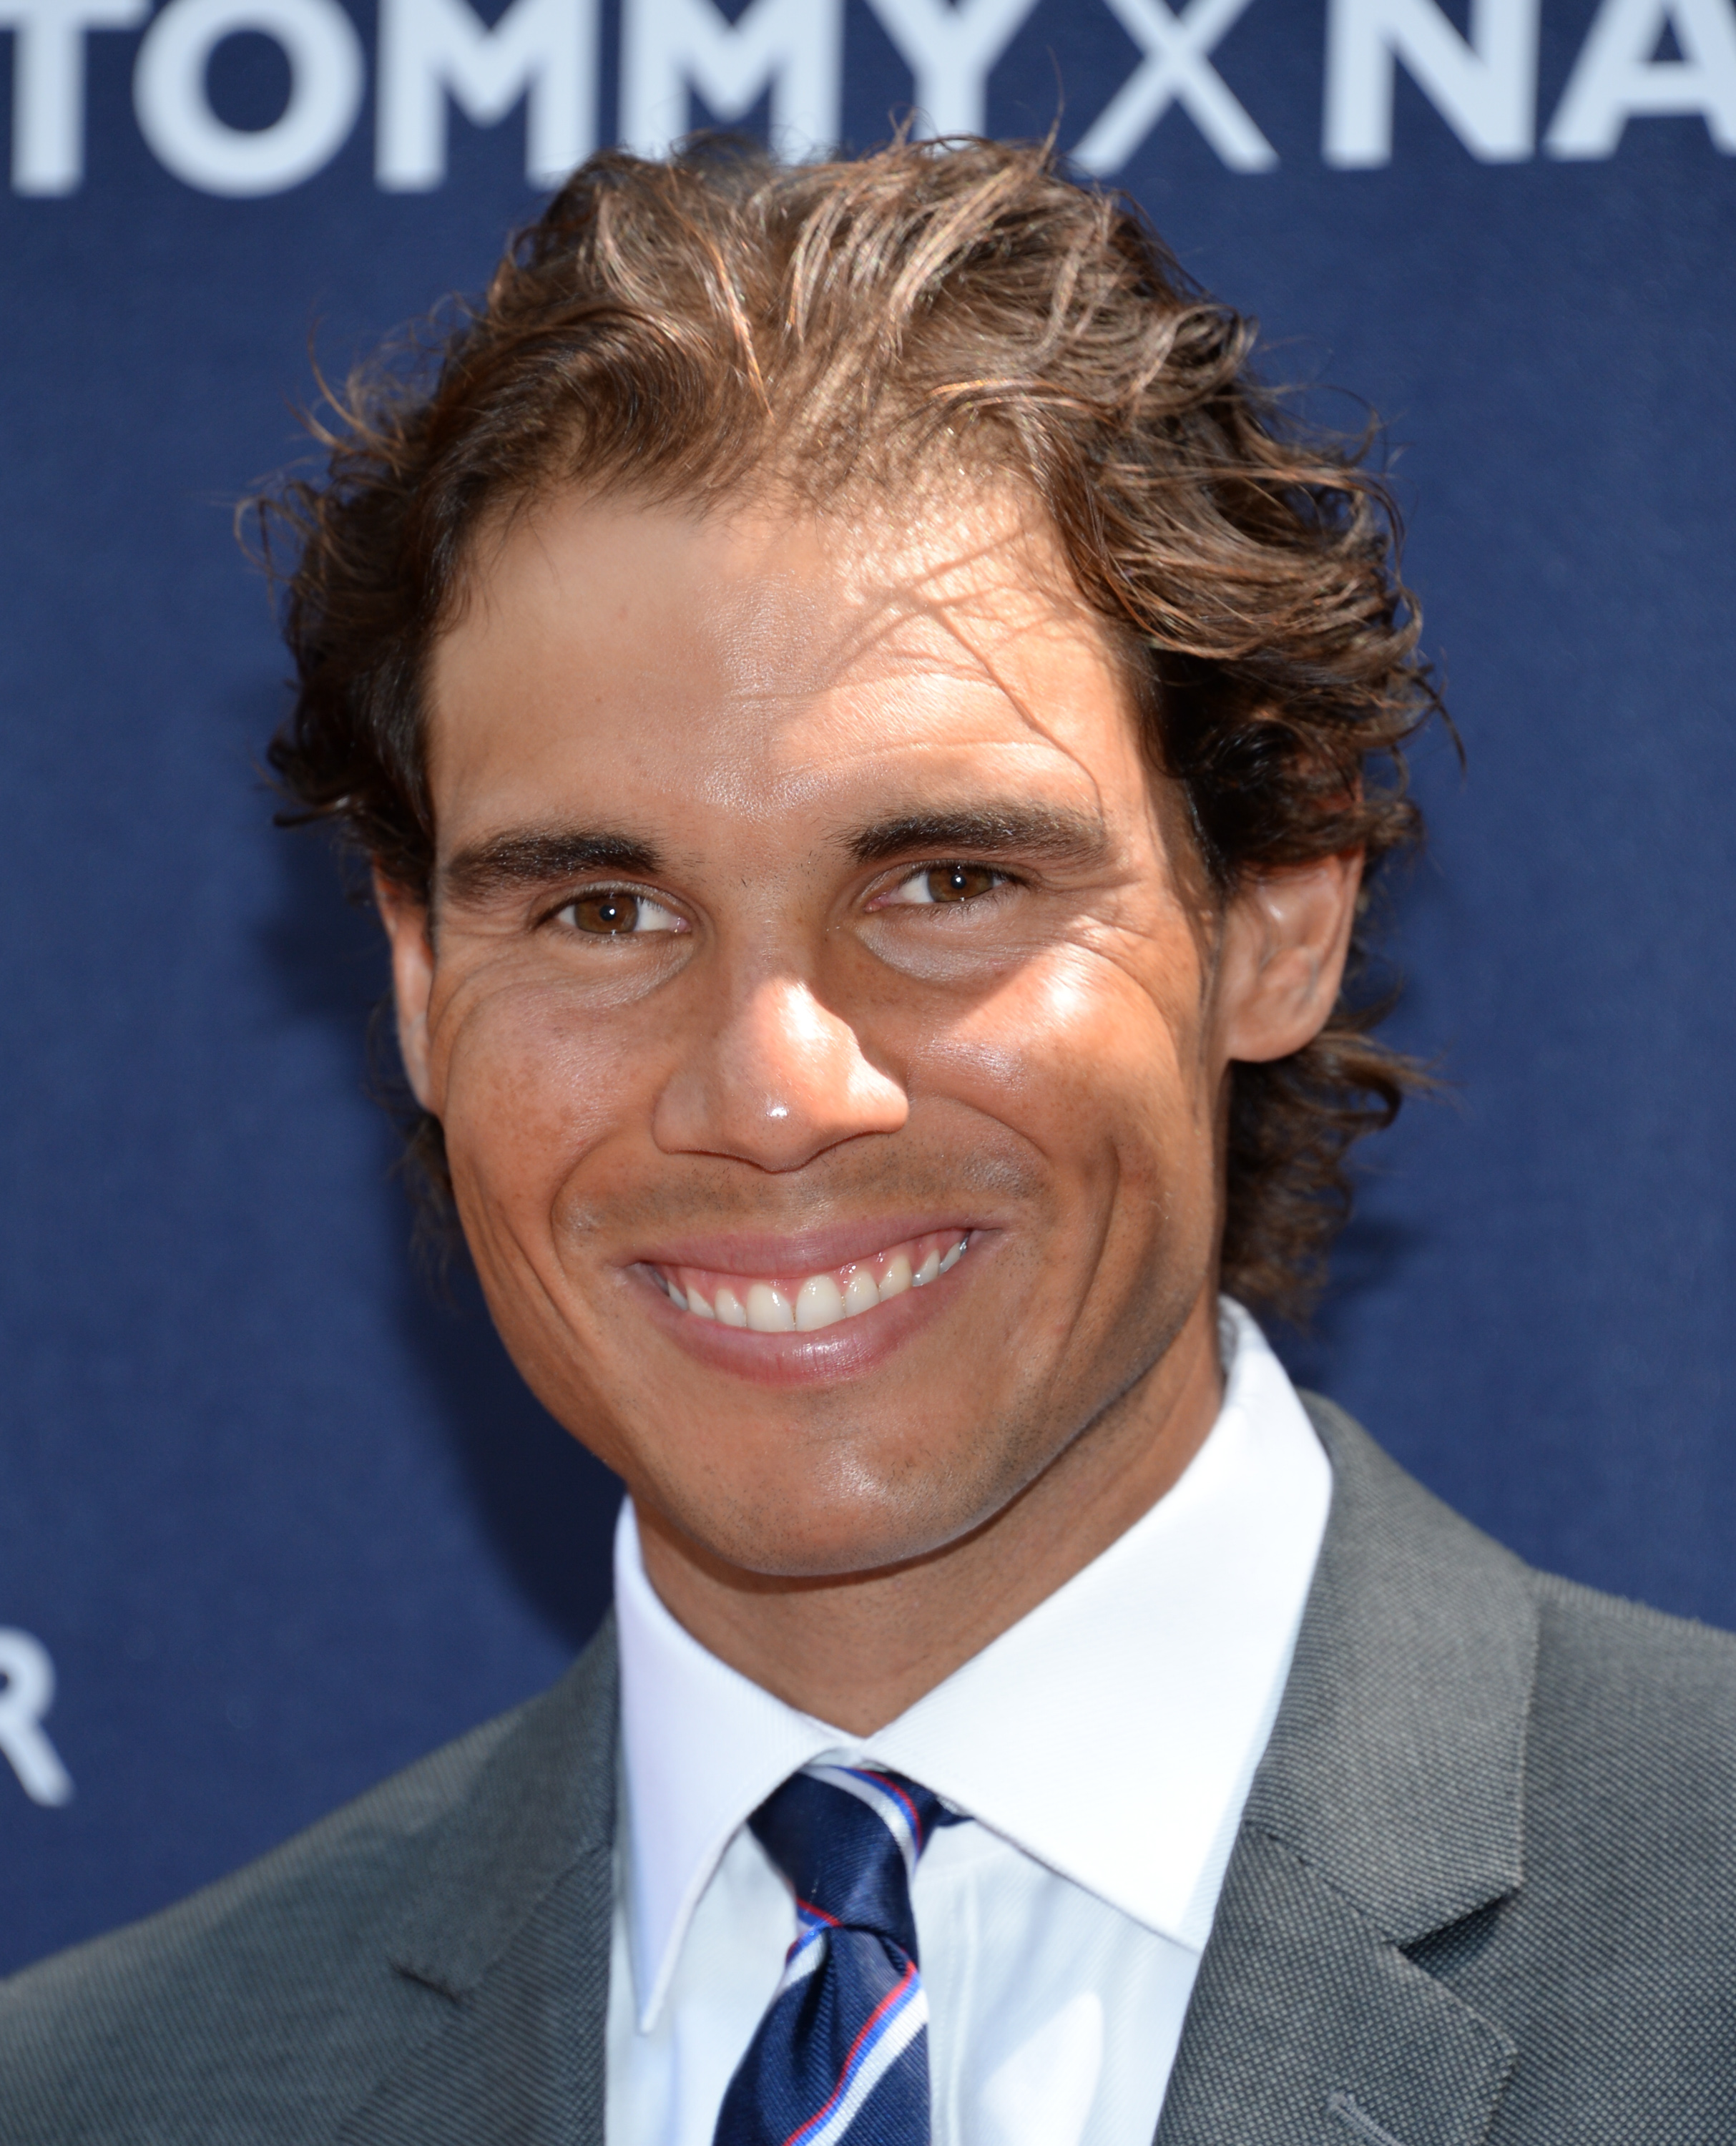 Rafael Nadal unveils his new Tommy Hilfiger campaign in NYC [PHOTOS] – Rafael Nadal Fans